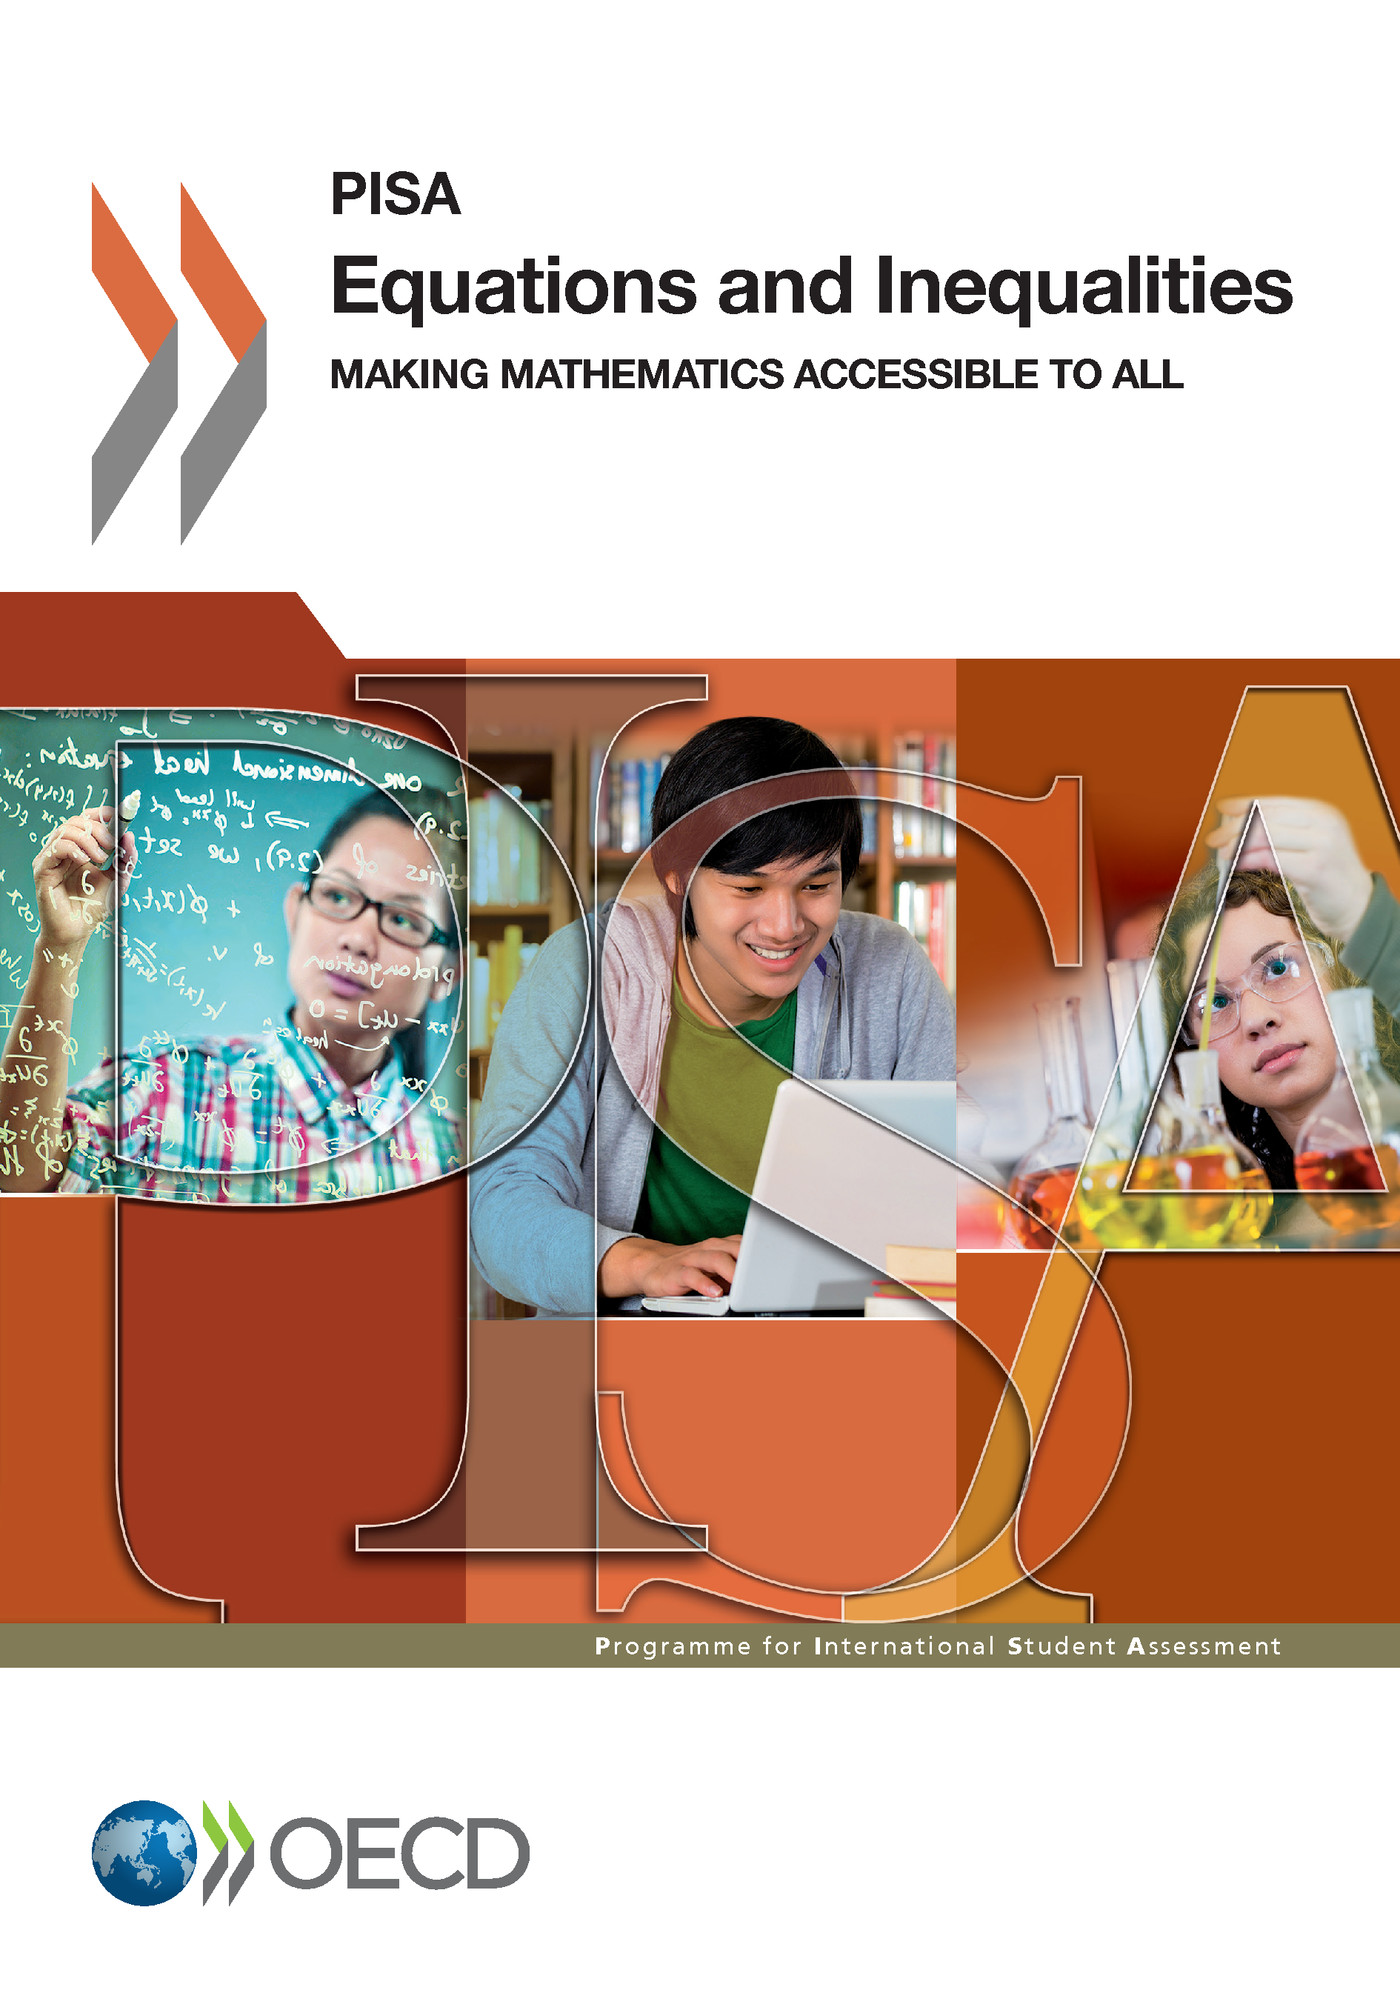 Equations and Inequalities -  Collectif - OCDE / OECD